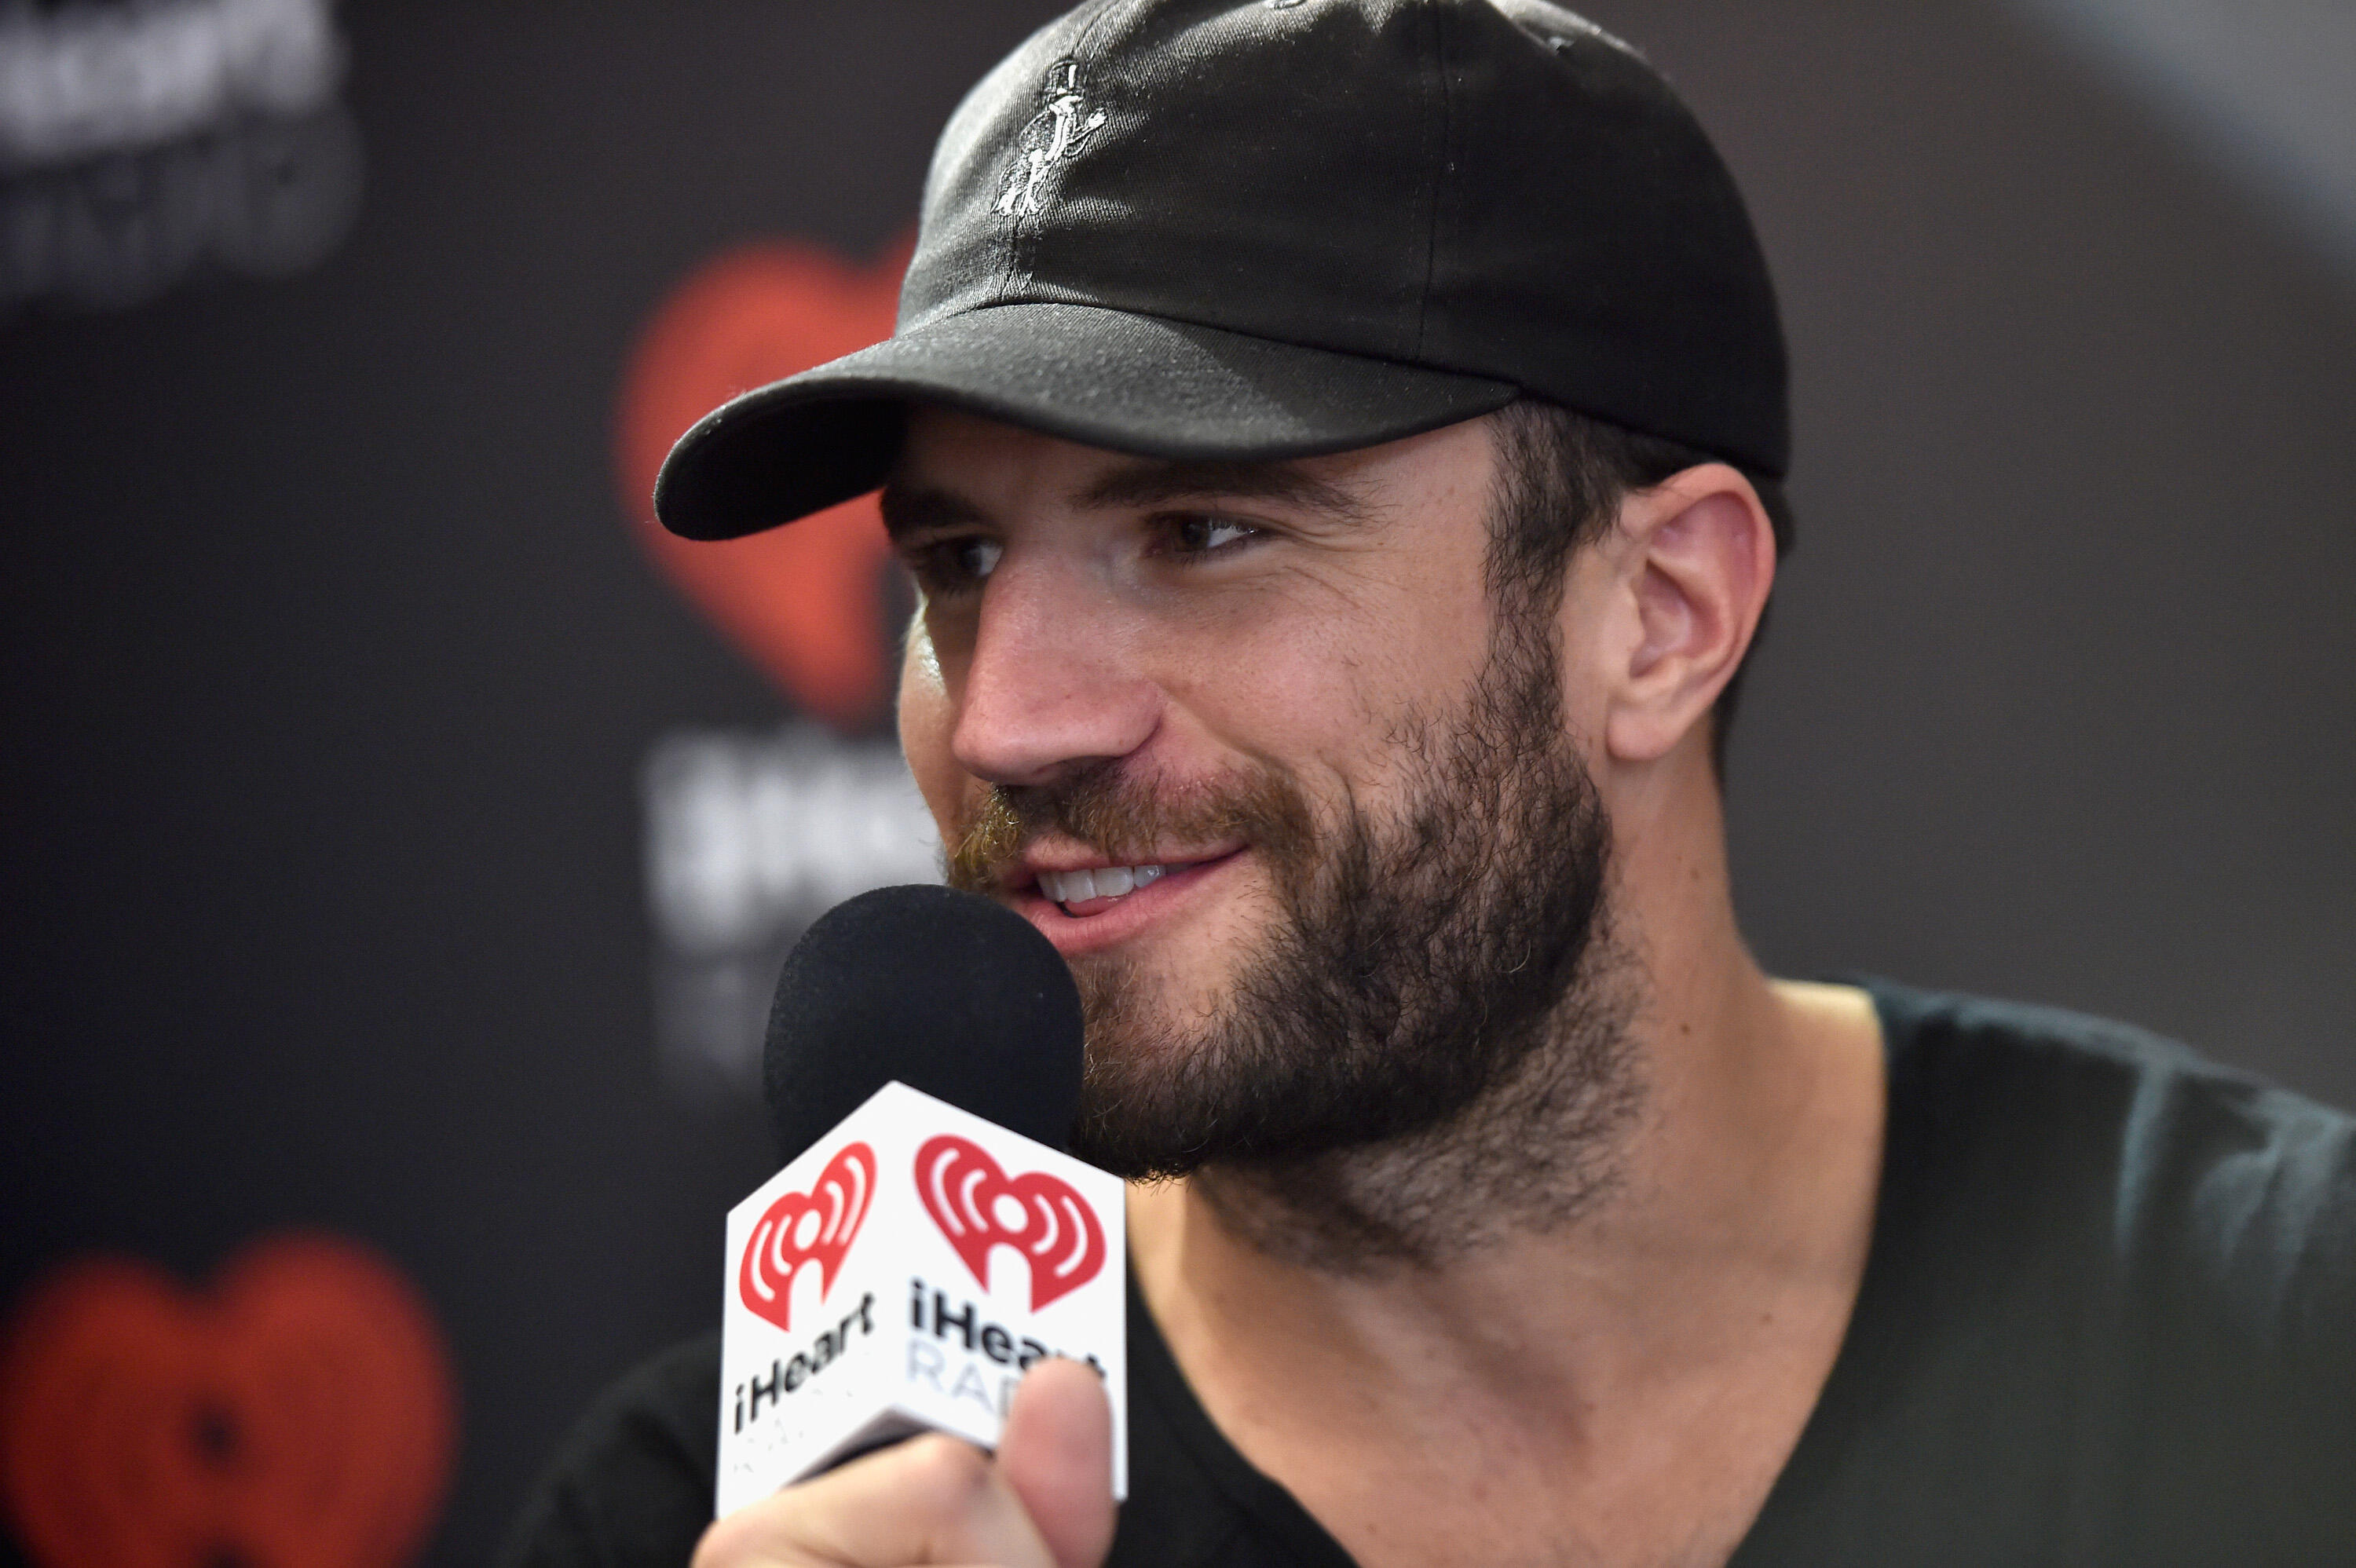 LAS VEGAS, NV - SEPTEMBER 24:  Singer-songwriter Sam Hunt attends the 2016 Daytime Village at the iHeartRadio Music Festival at the Las Vegas Village on September 24, 2016 in Las Vegas, Nevada.  (Photo by David Becker/Getty Images for iHeartMedia)